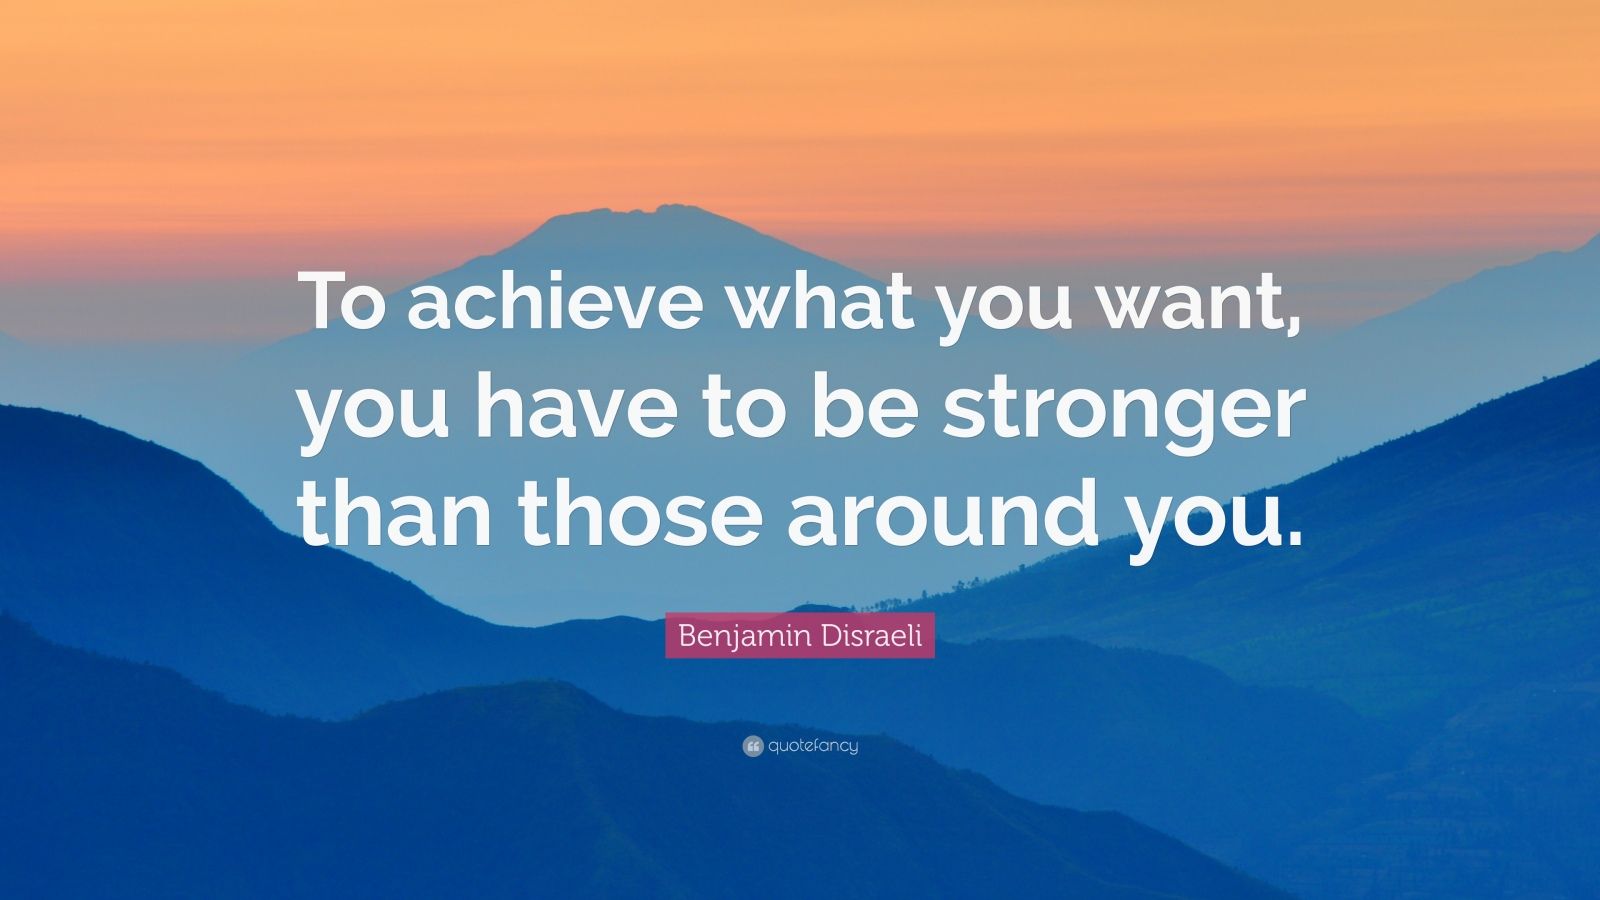 Benjamin Disraeli Quote: “To achieve what you want, you have to be ...